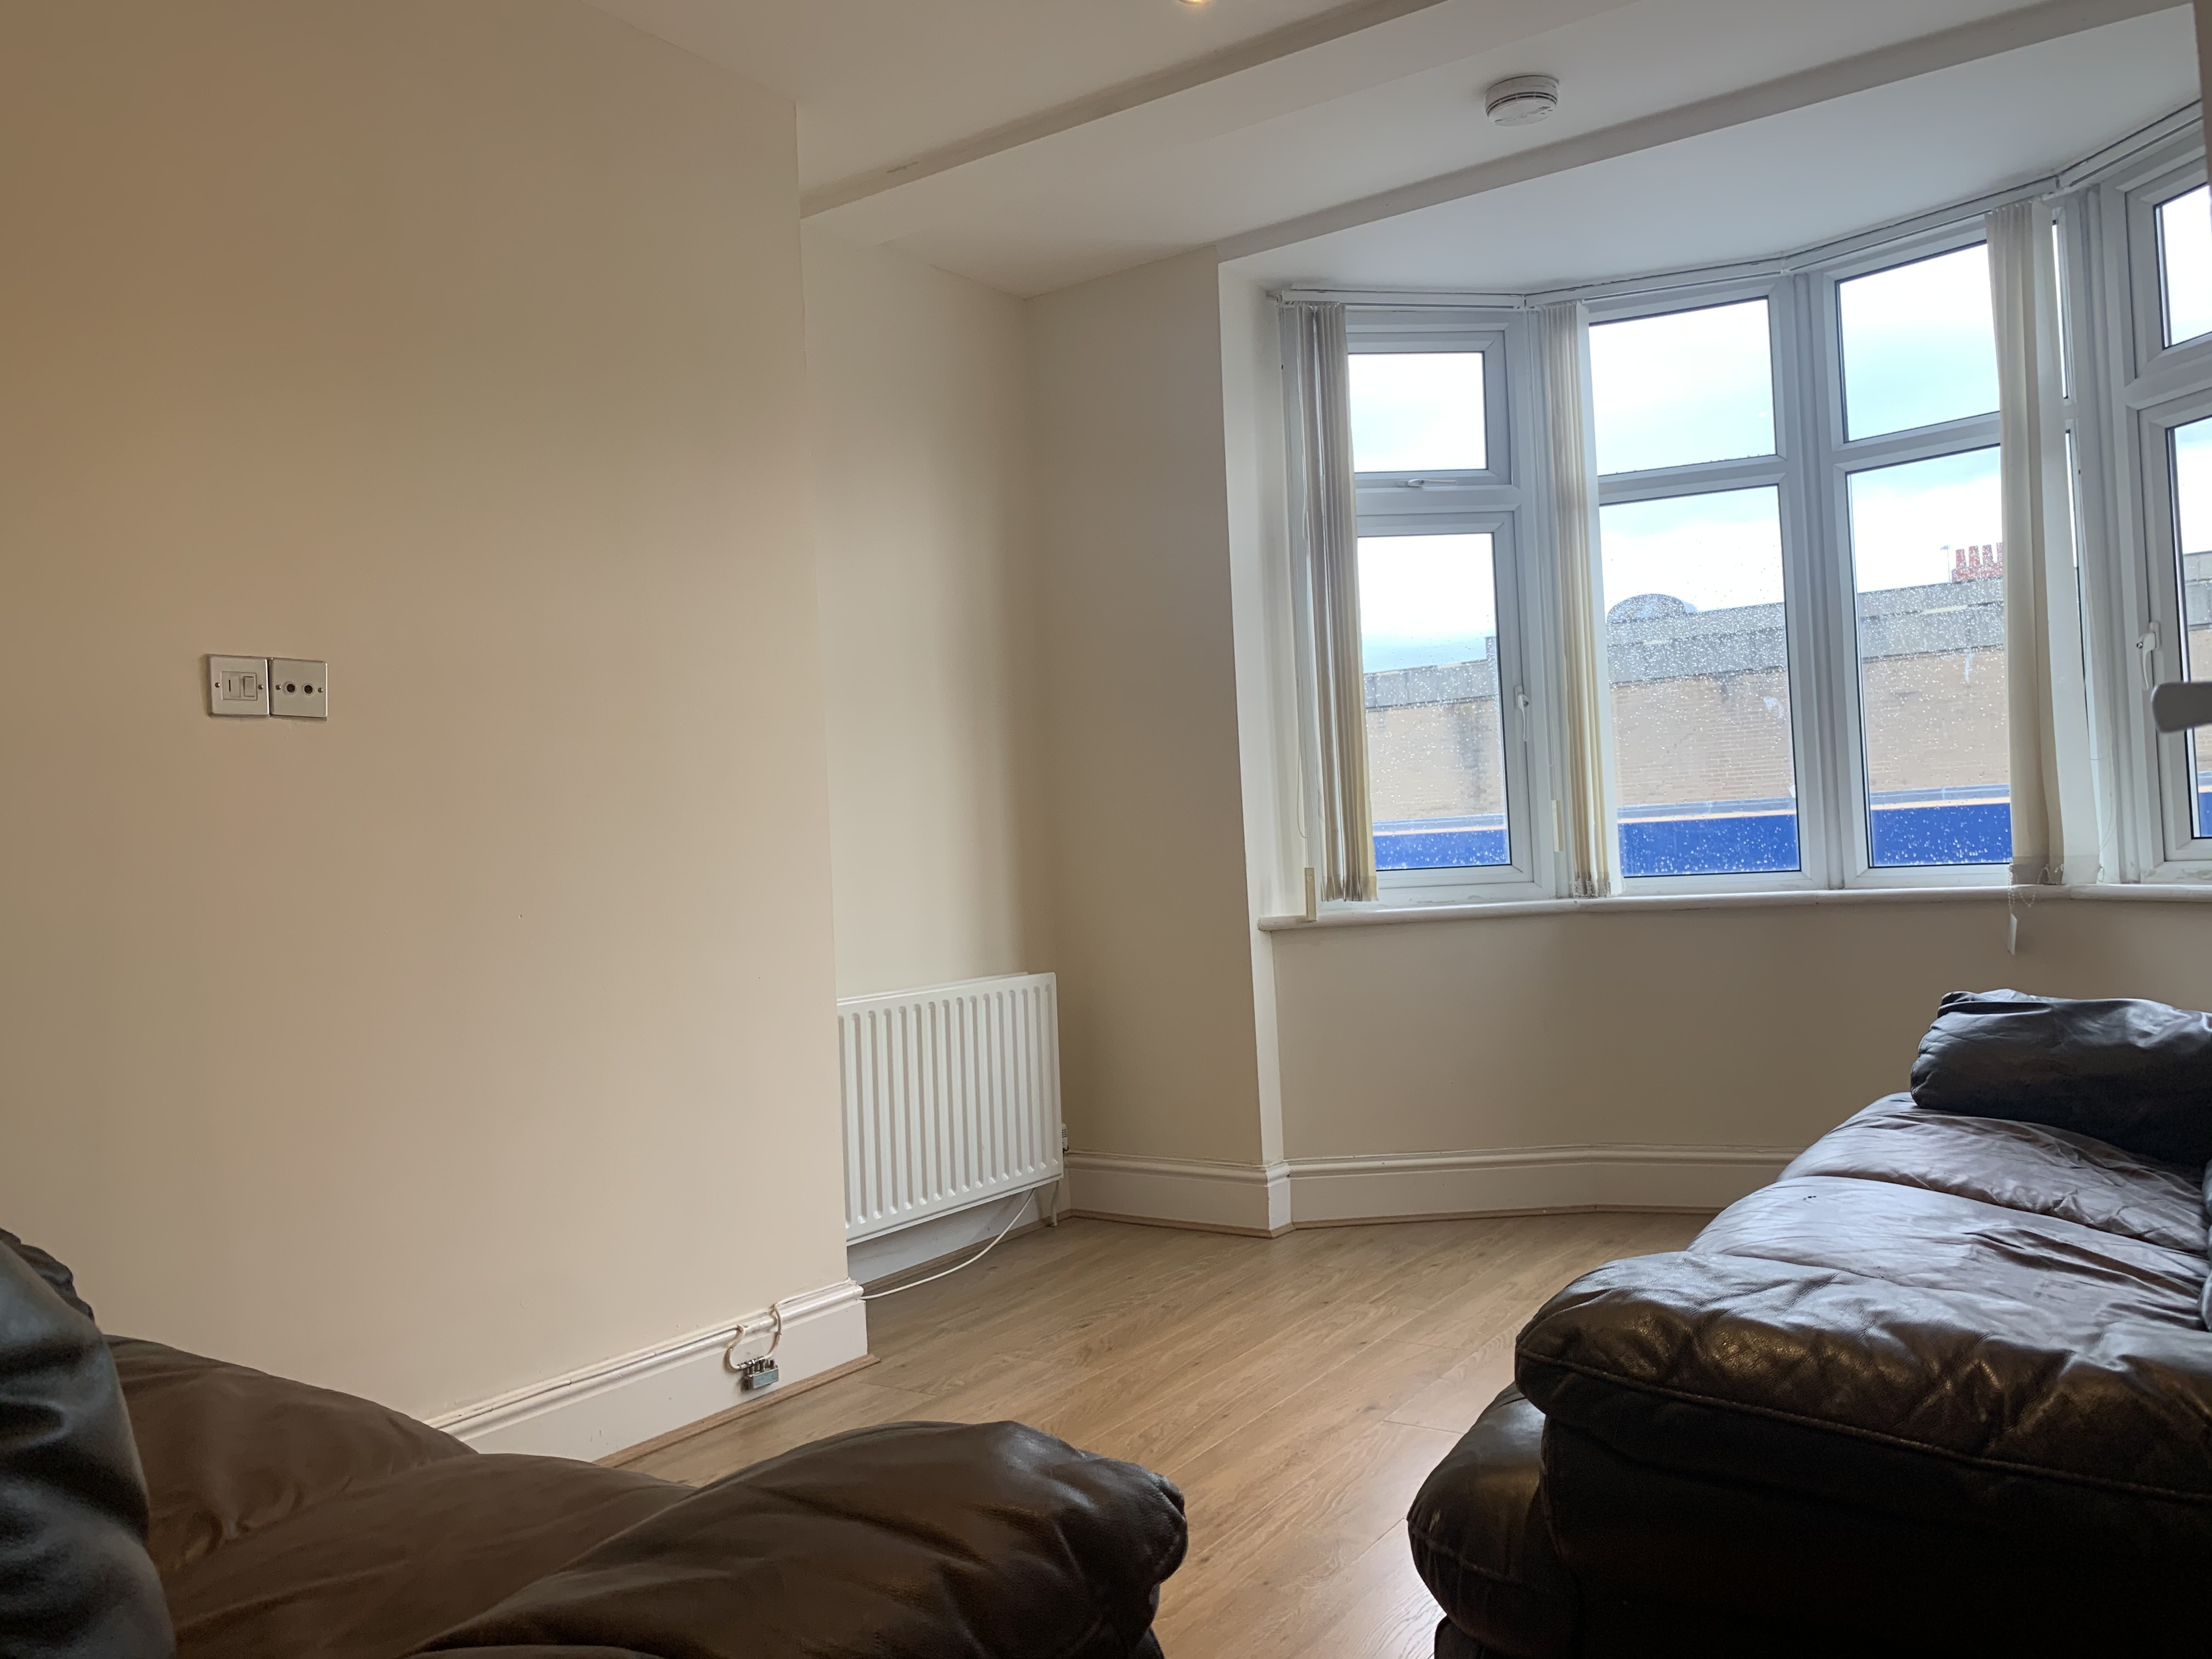 5 bed maisonette to rent in Chillingham Road, Newcastle upon tyne  - Property Image 3